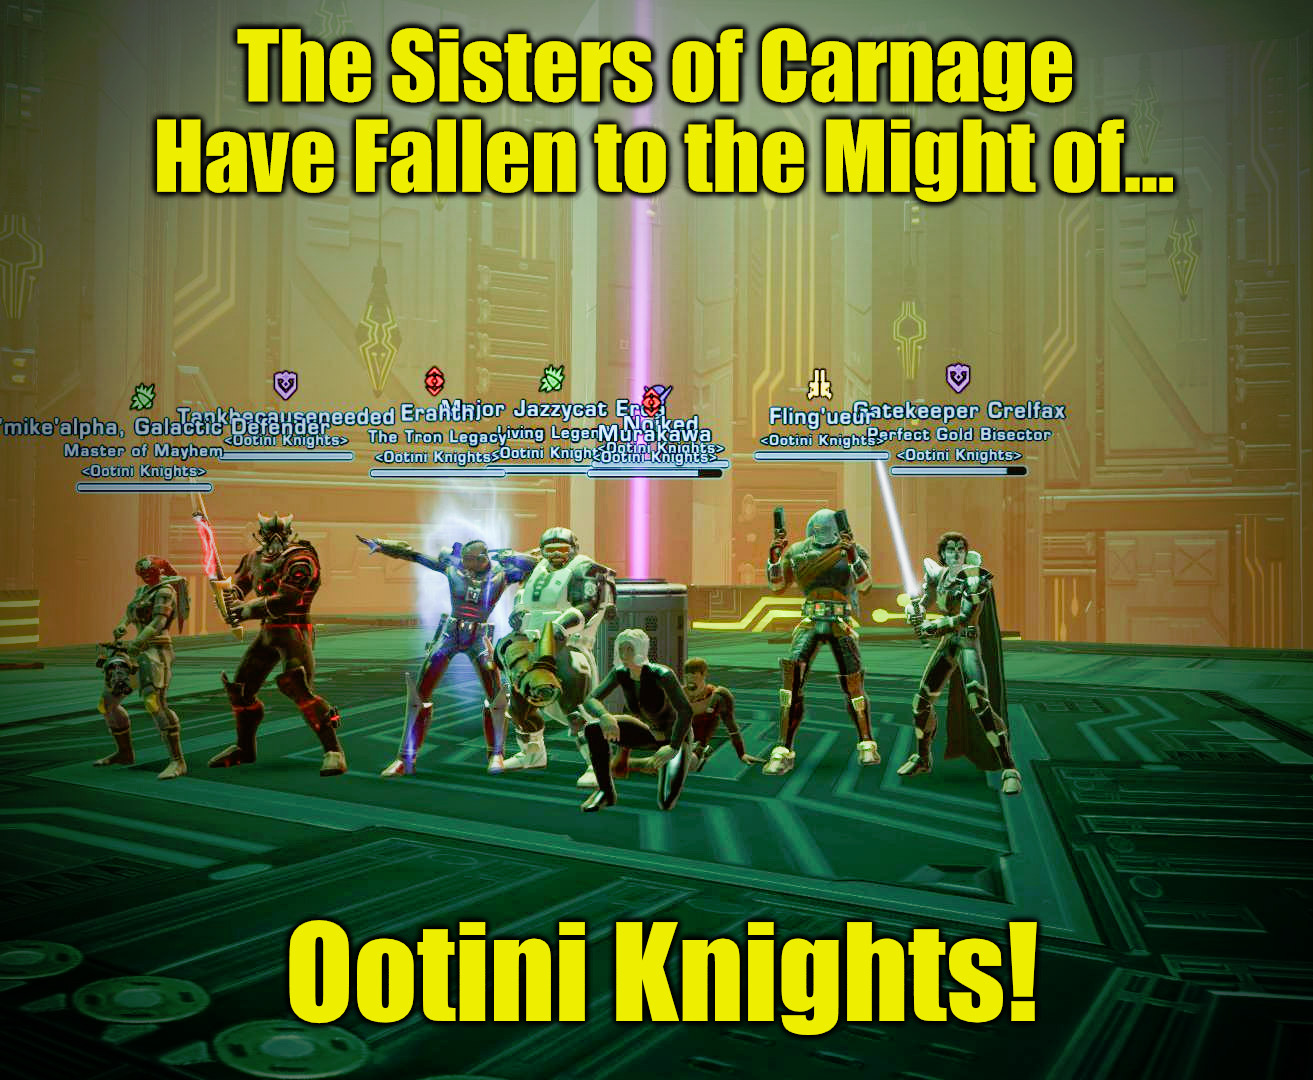 Ootini Knights vs. Sisters of Carnage | The Sisters of Carnage Have Fallen to the Might of…; Ootini Knights! | image tagged in ootini,ootini knights,sisters of carnage,star wars,the old republic,swtor | made w/ Imgflip meme maker